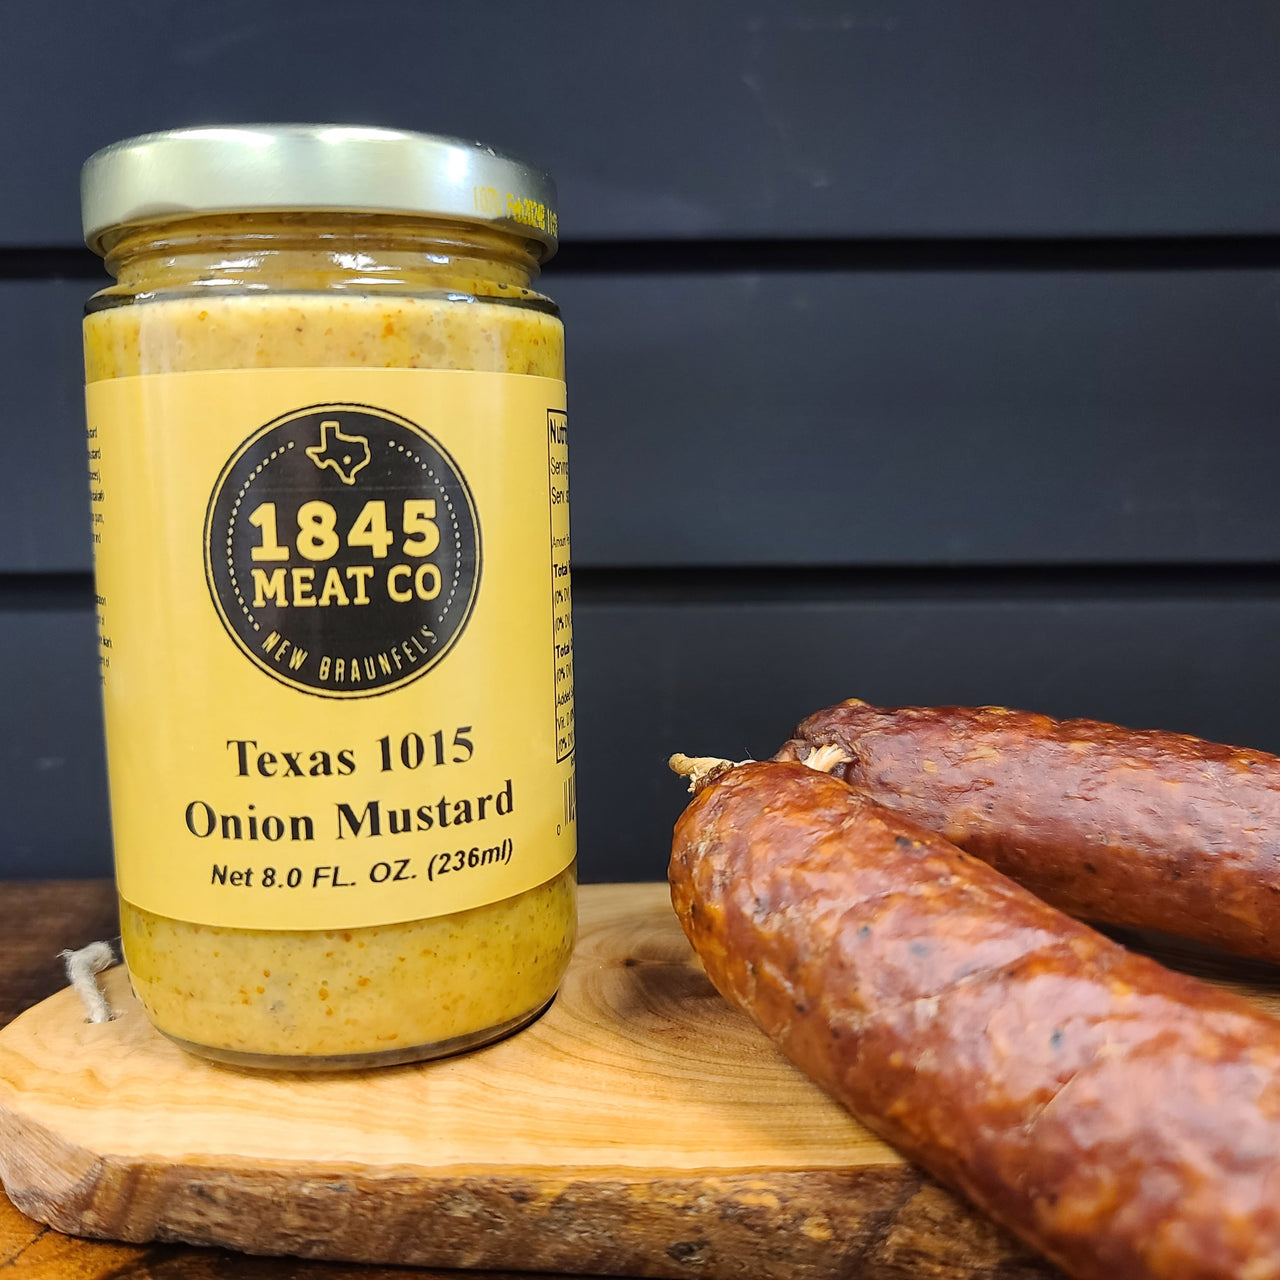 ﻿Sweet Texas 1015 onions and a classic gourmet mustard combined to make a great condiment.  Add to your sandwich or as an addition for a sauce.